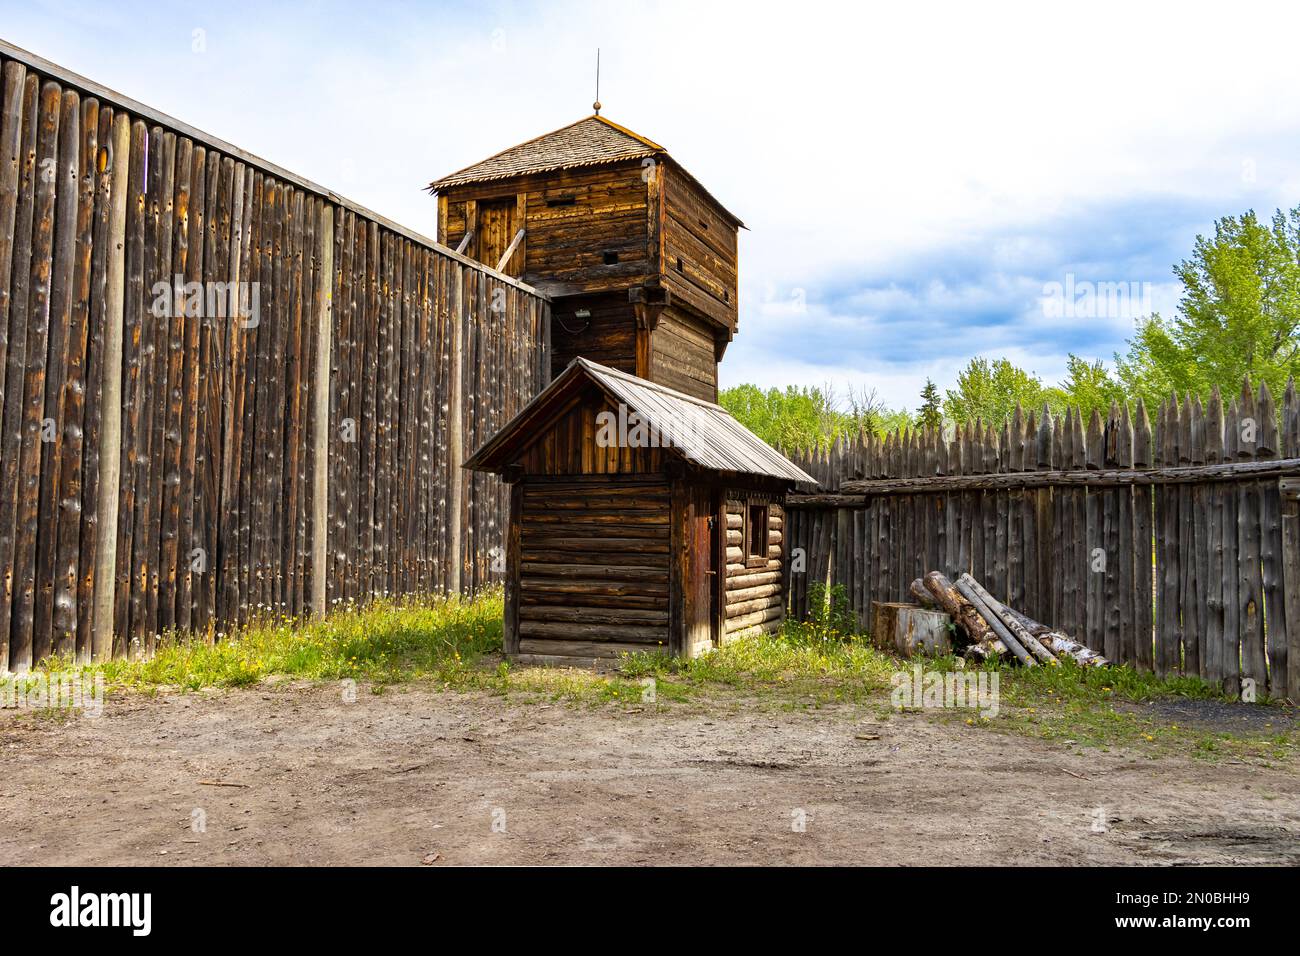 1800s historical fort wooden building Stock Photo